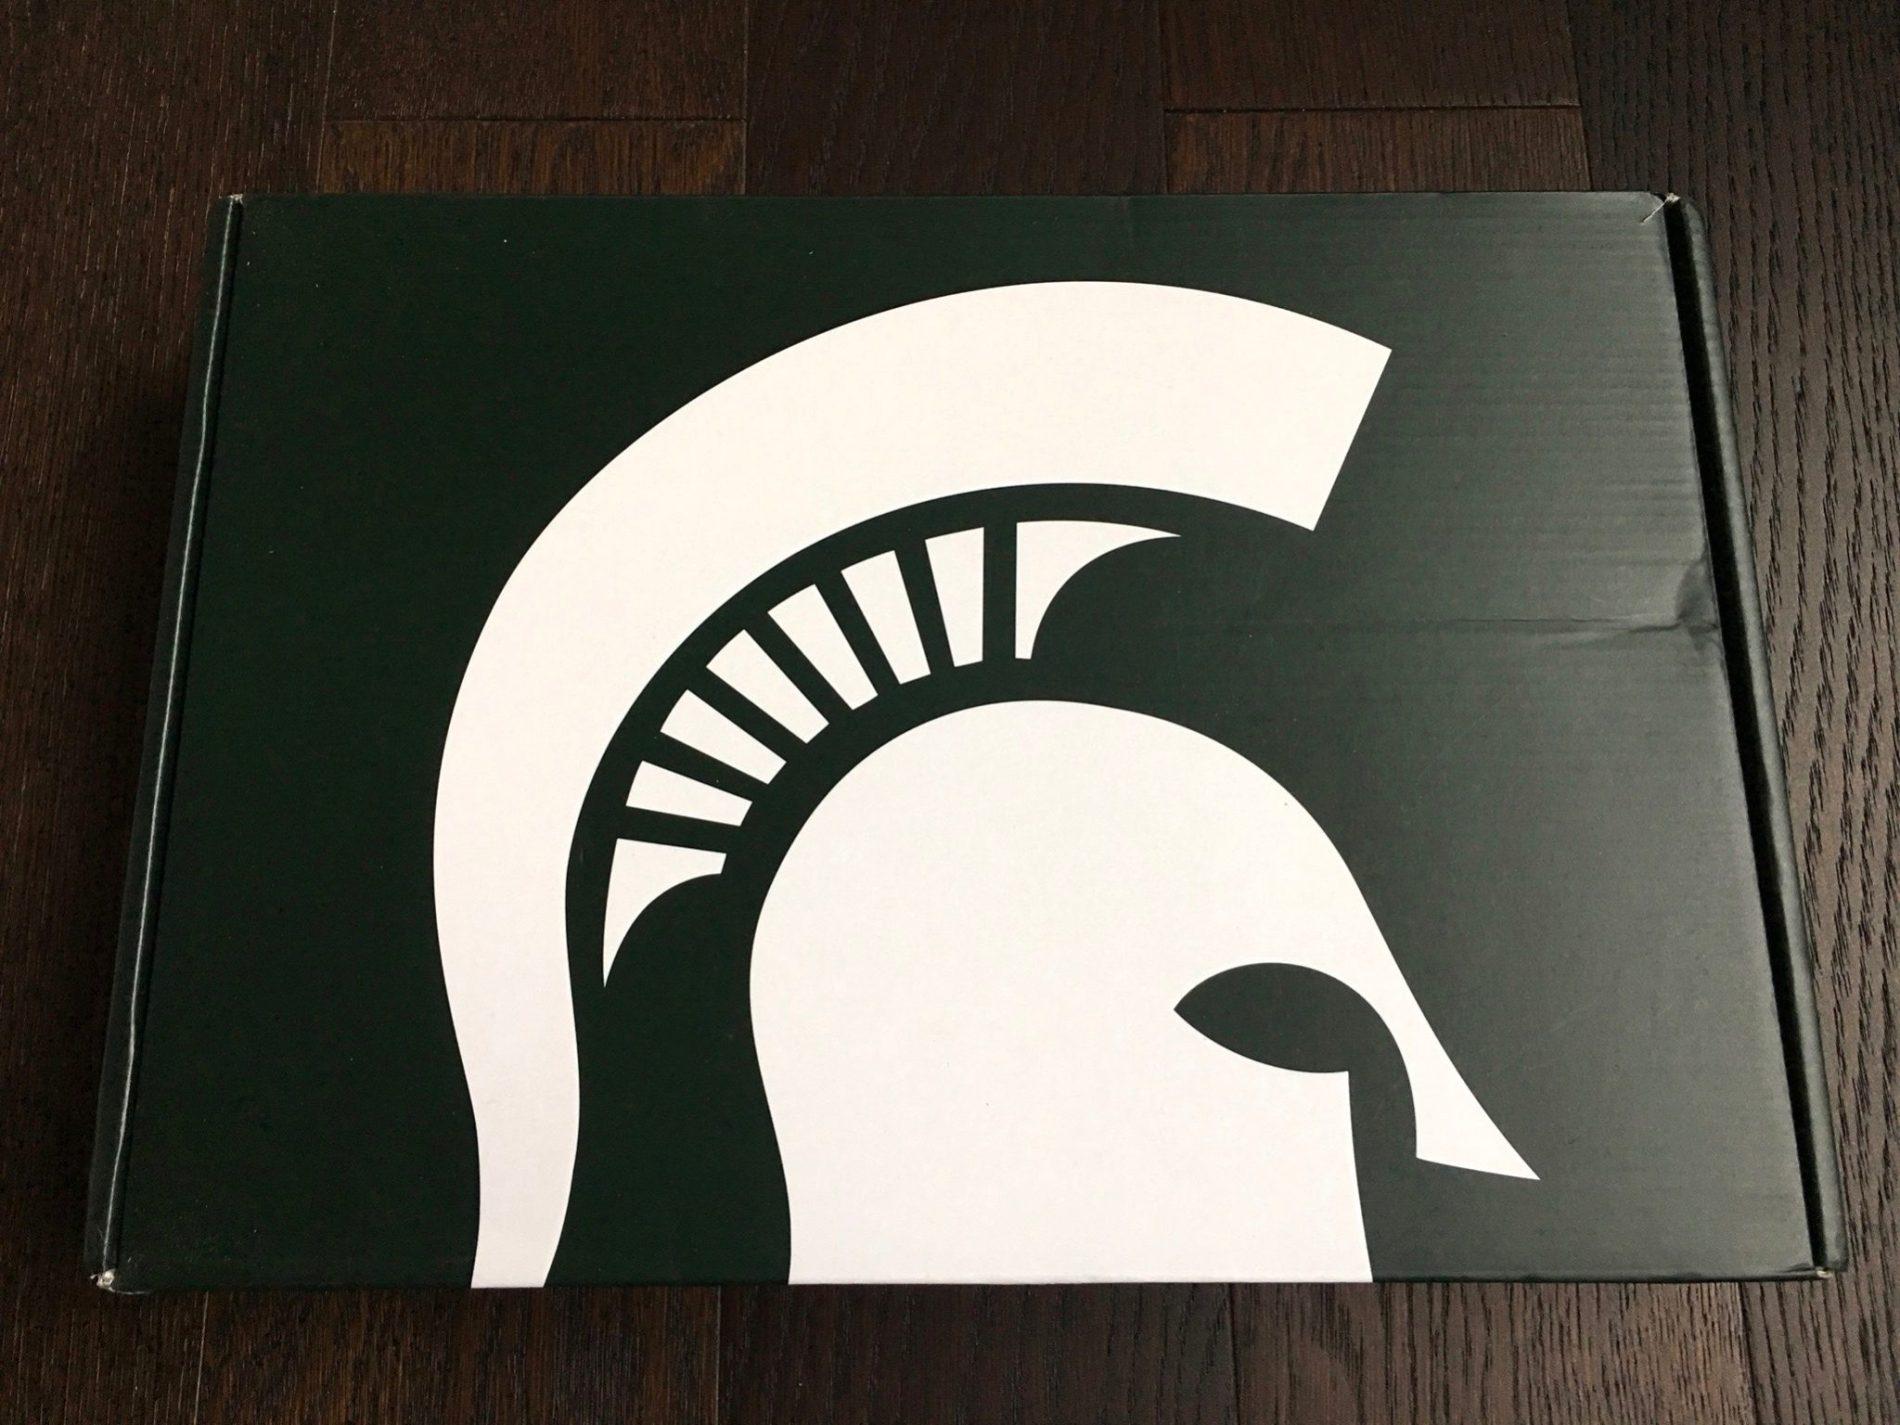 Spartan Box Michigan State Subscription Box Review – February 2018